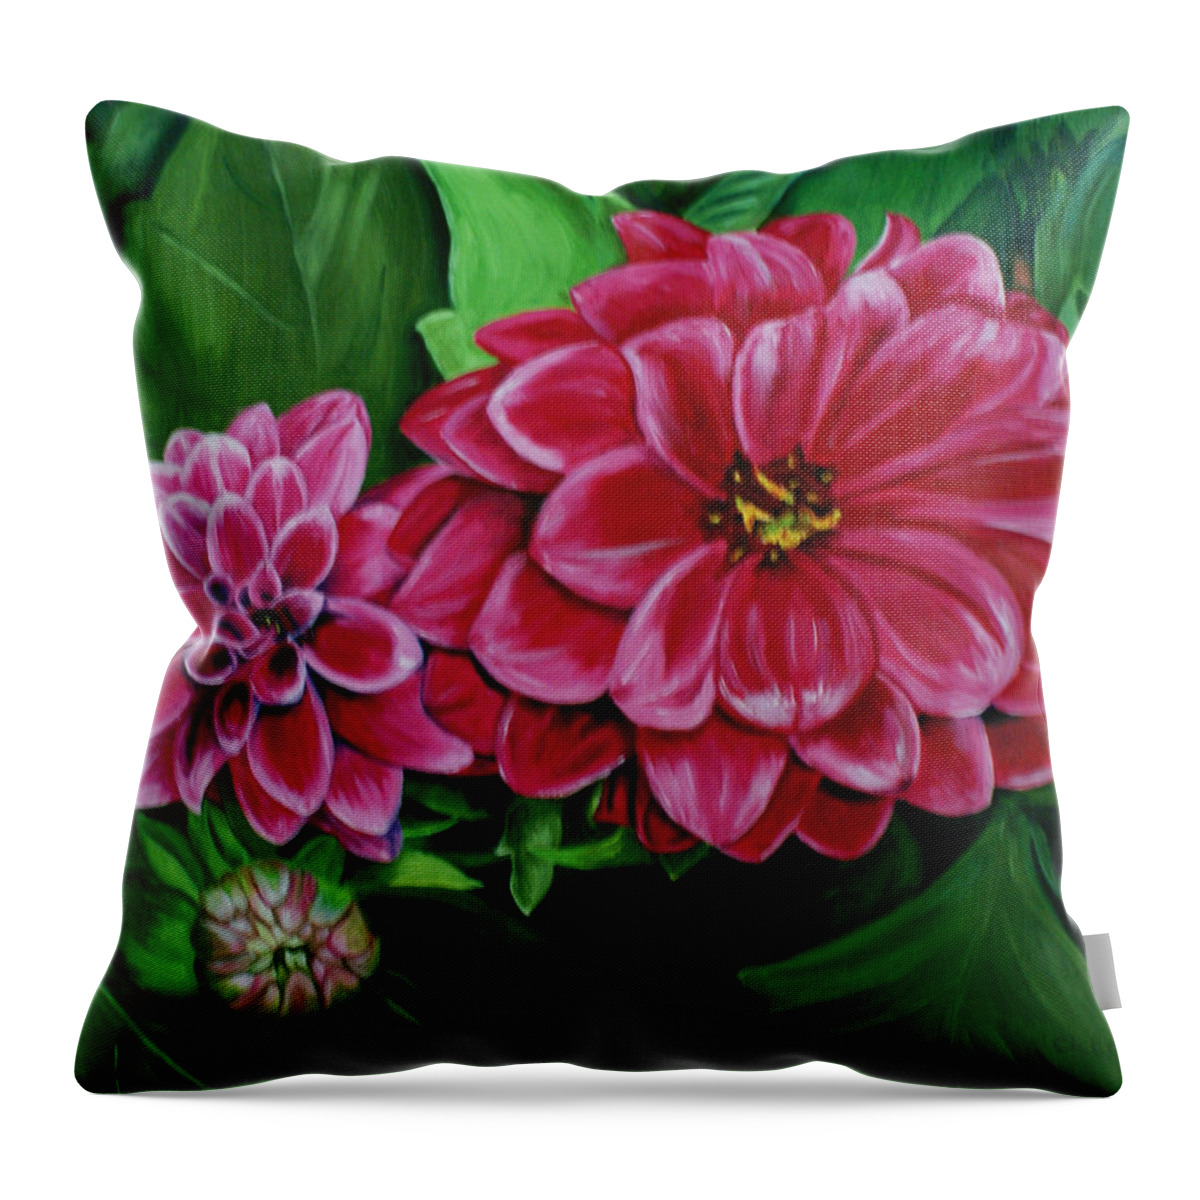 Floral Throw Pillow featuring the painting Buds and Blossoms by Jill Ciccone Pike